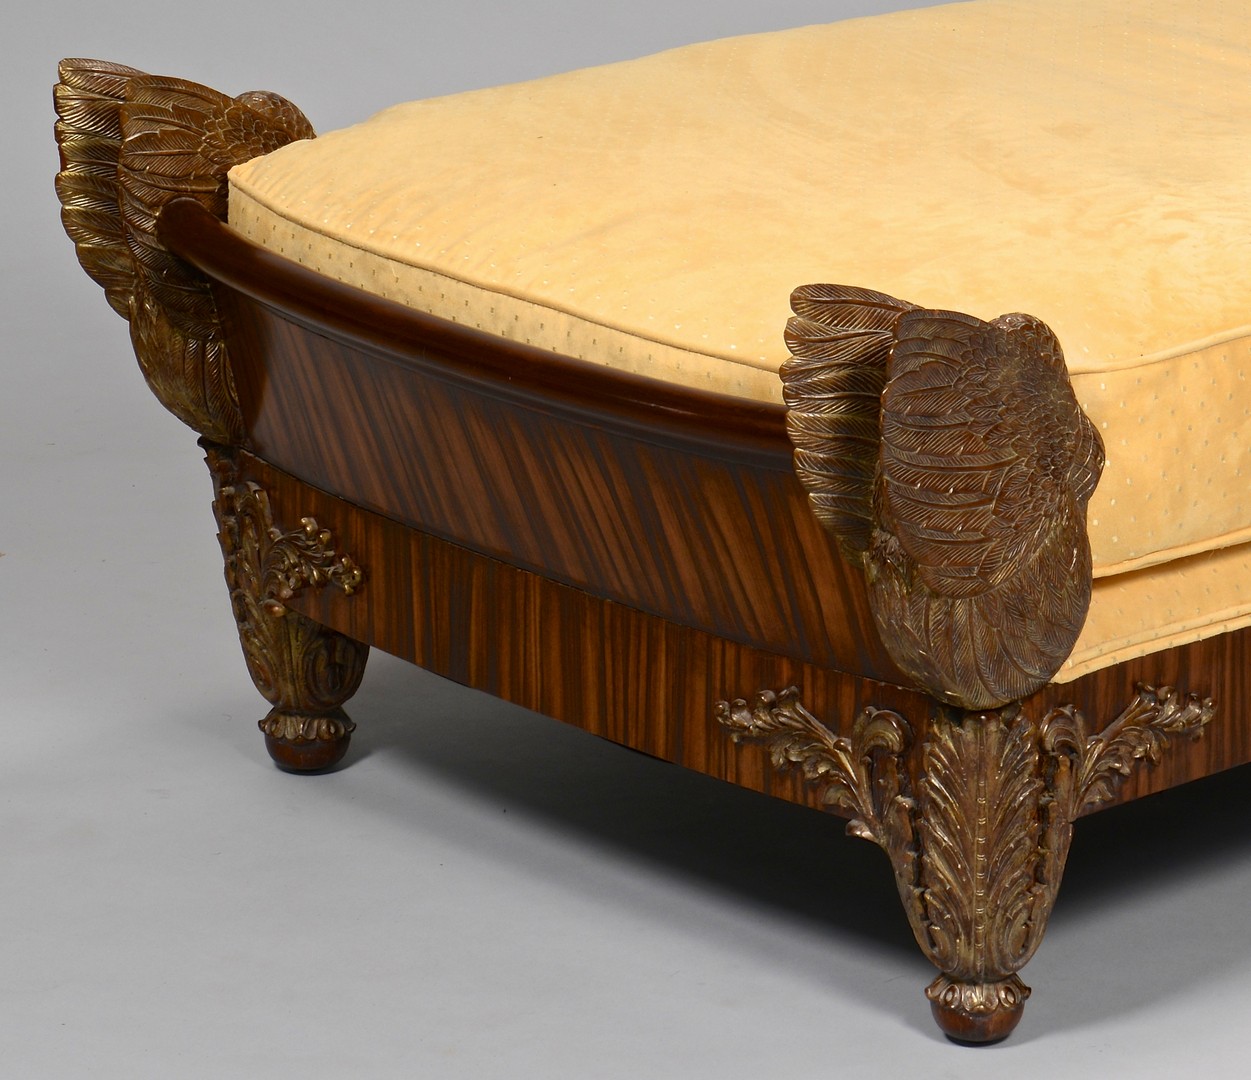 Lot 270: French Second Empire Swan Day Bed